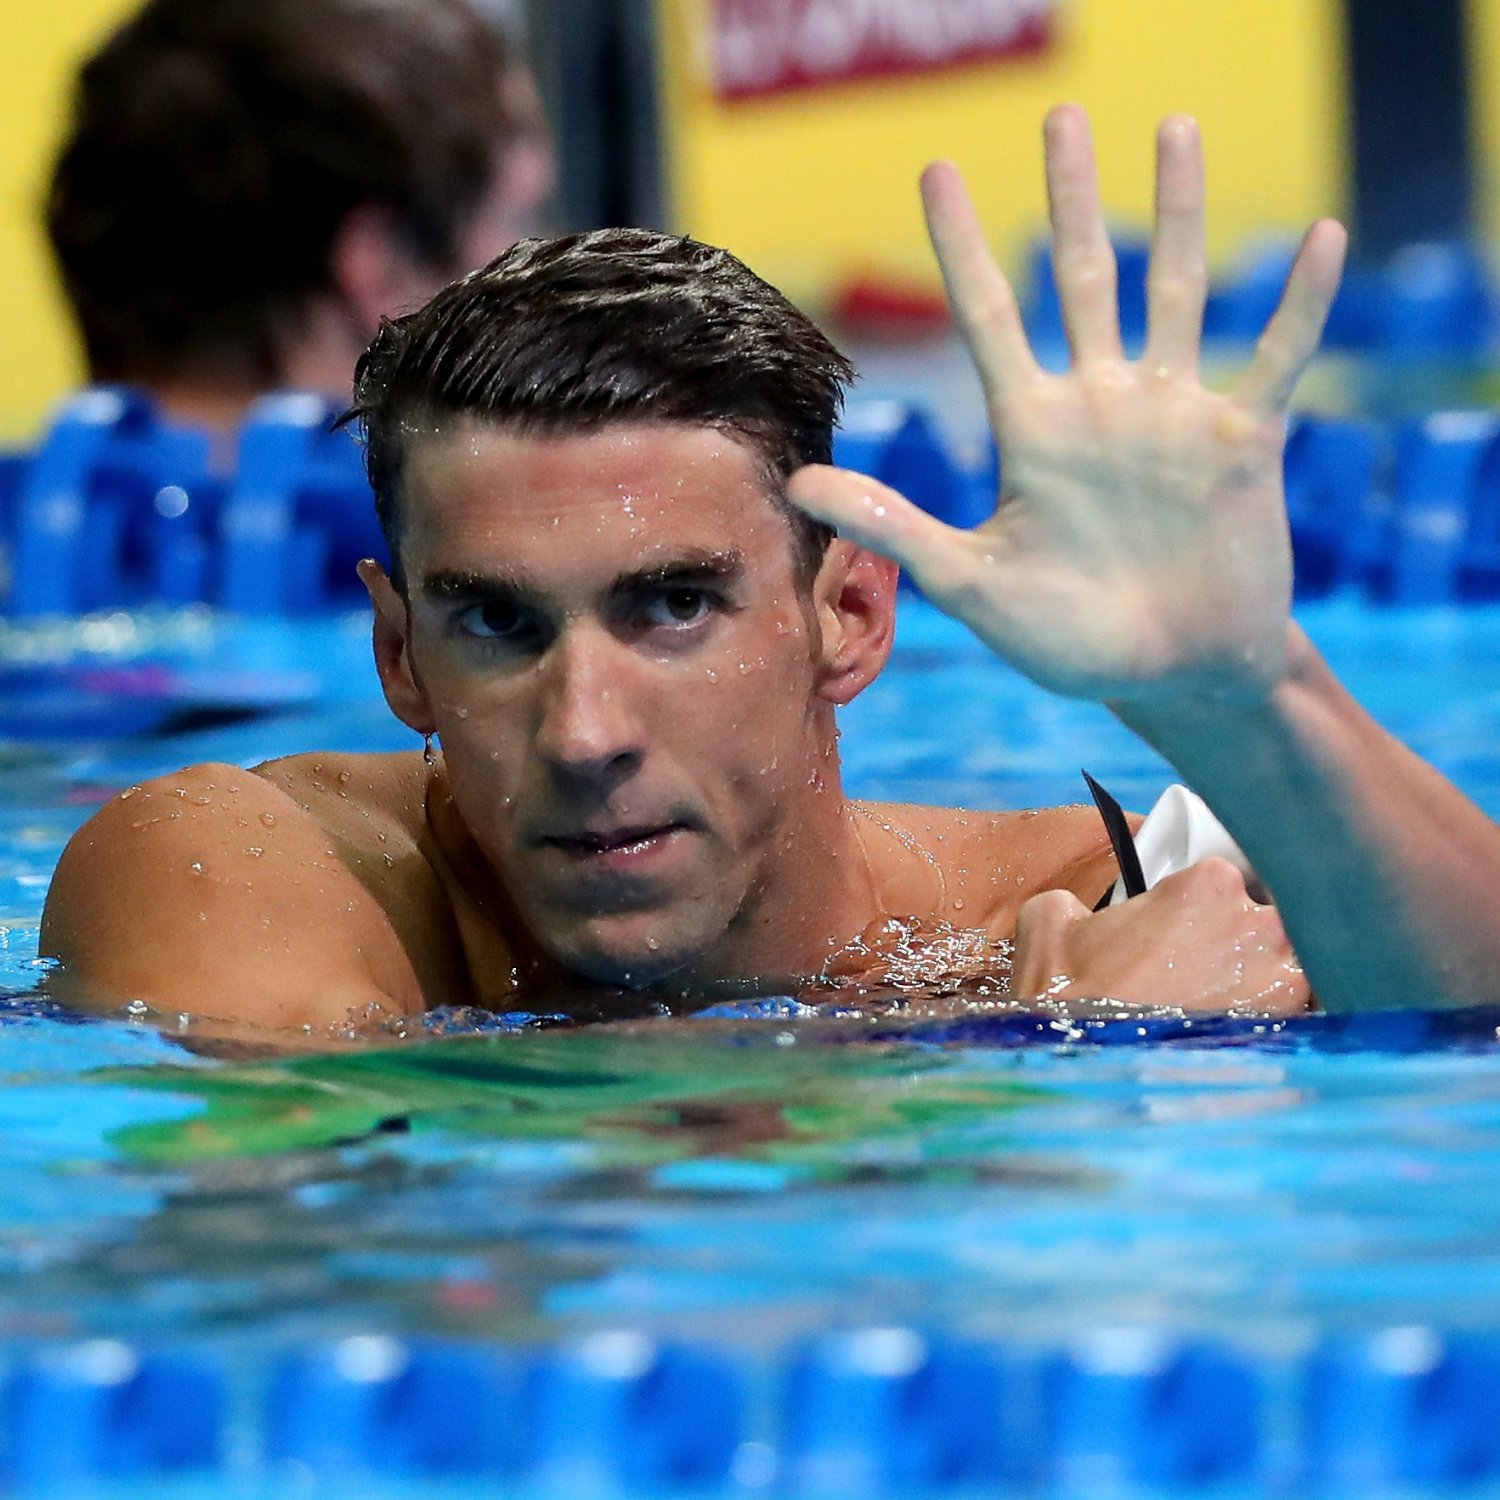 Why Michael Phelps Is the Greatest Olympic Athlete of All Time